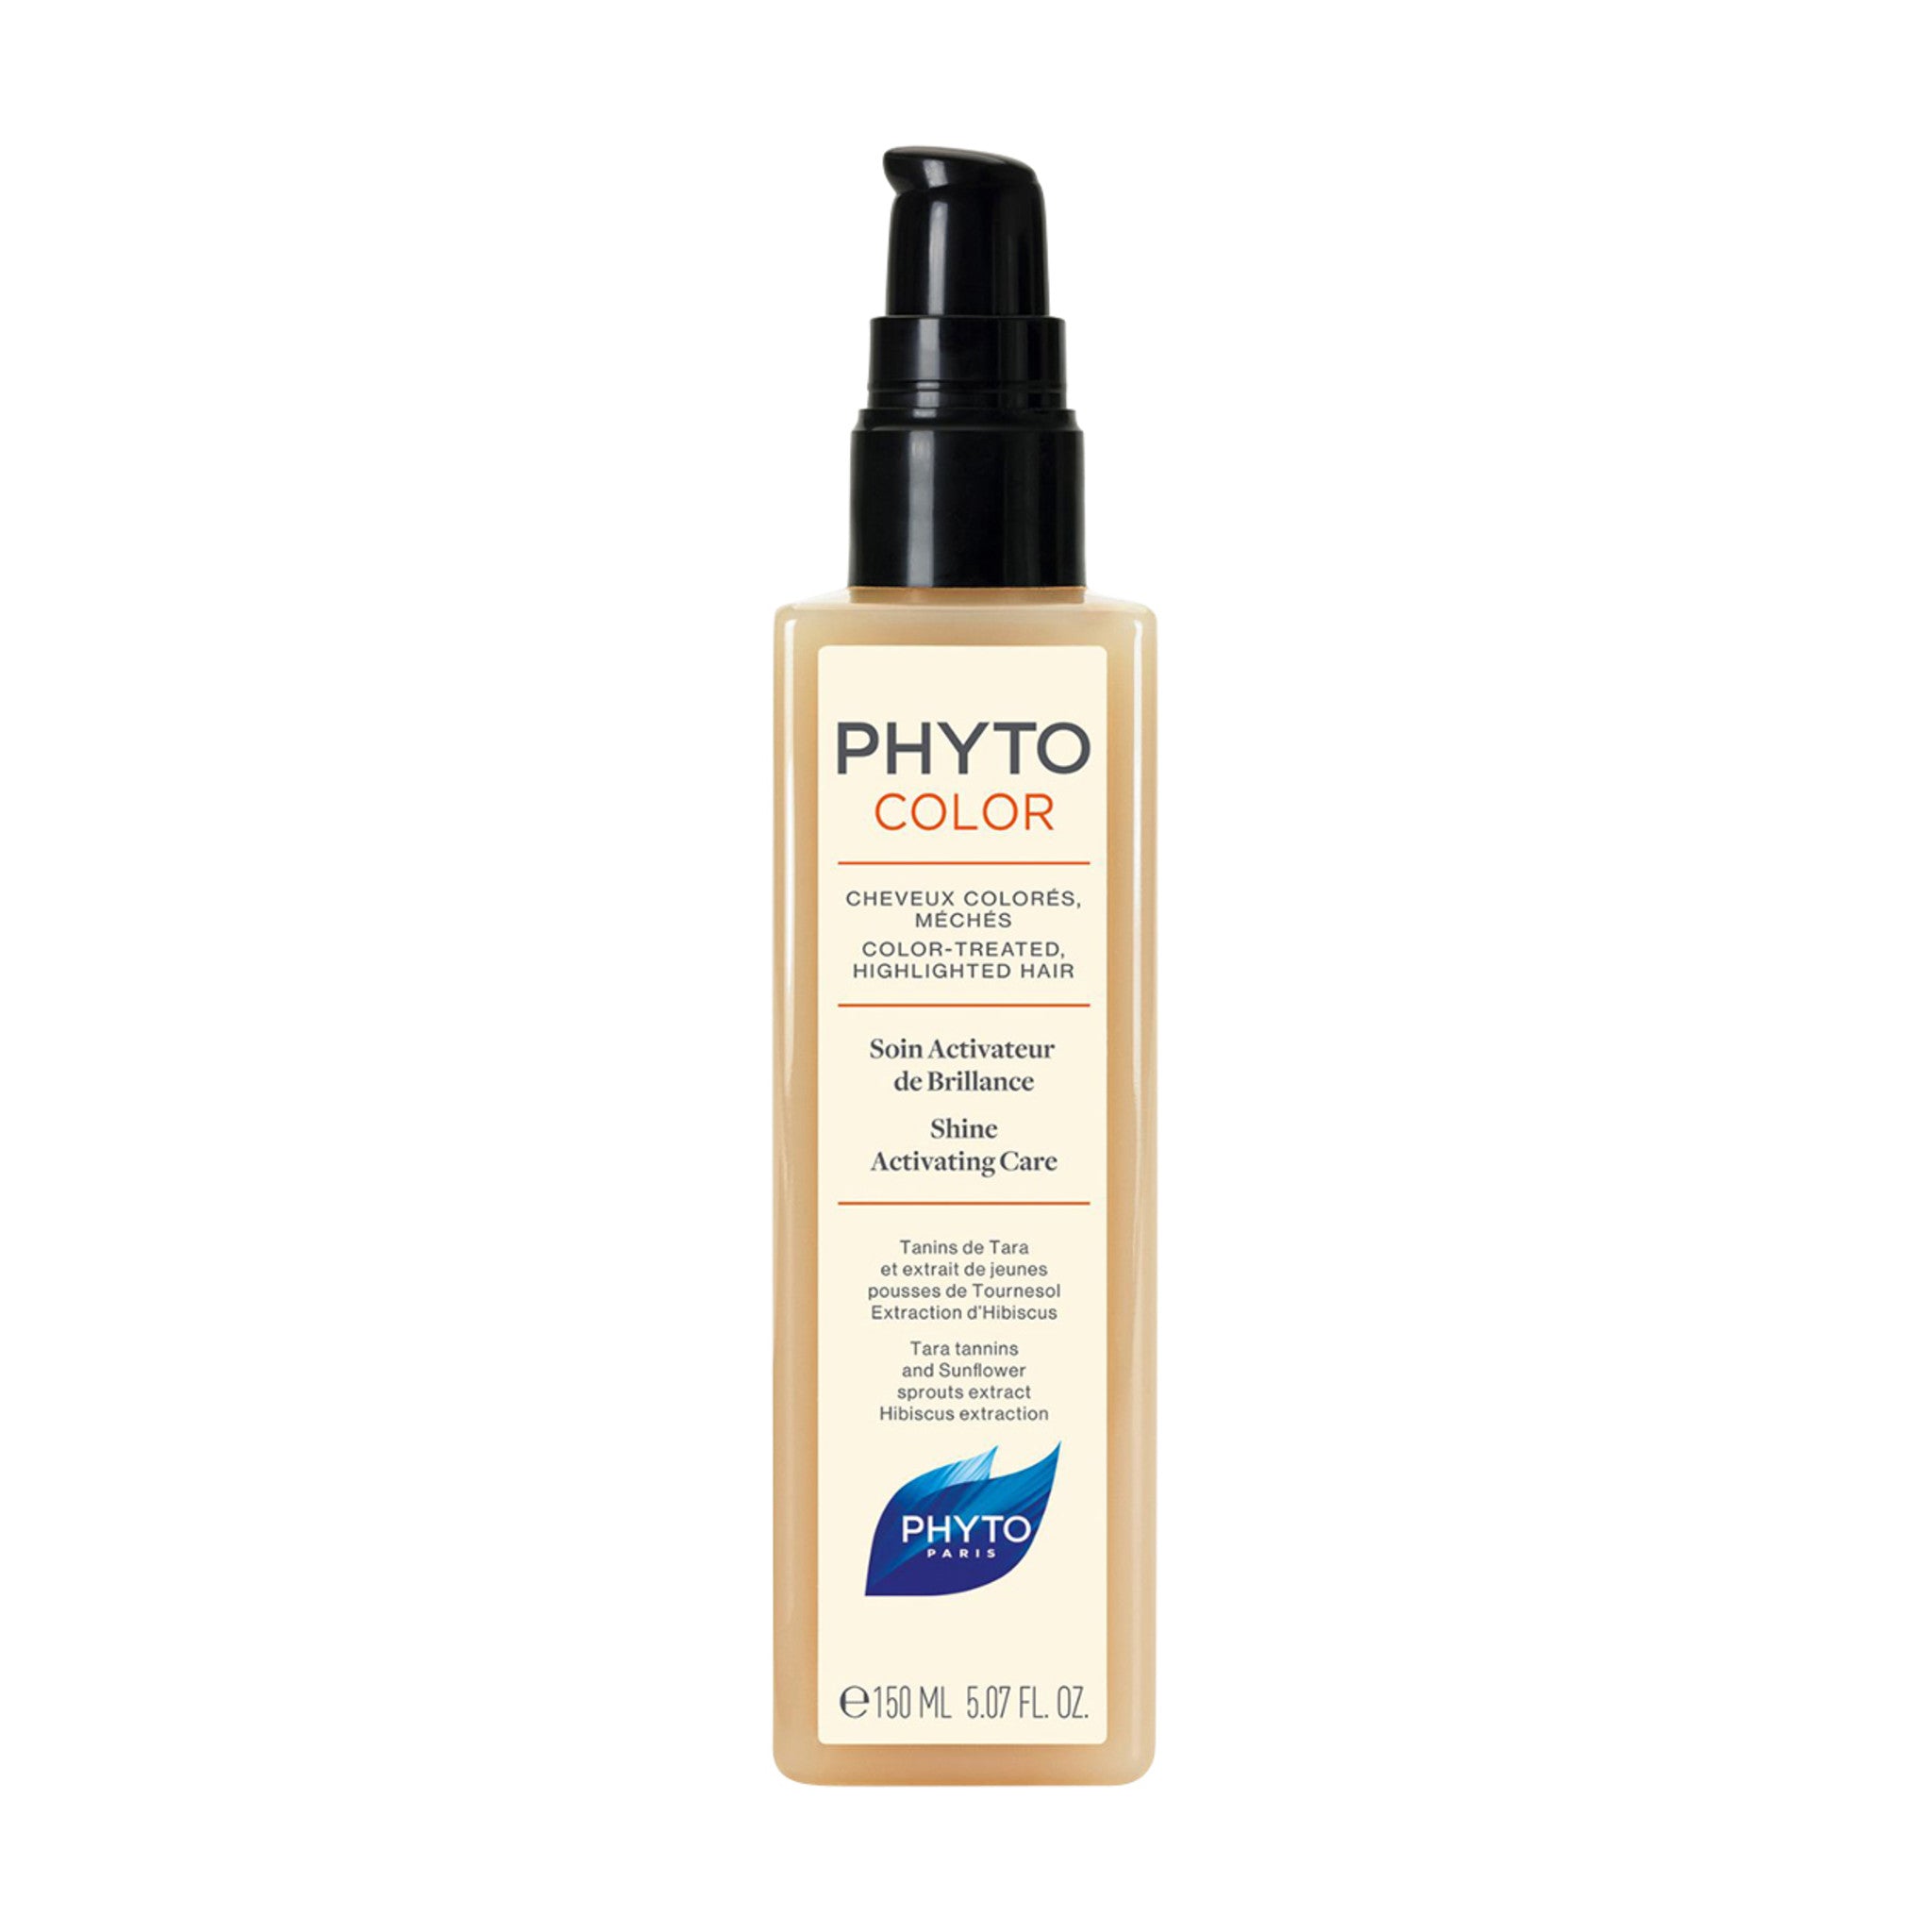 Phyto Phytocolor Shine Activating Care main image.